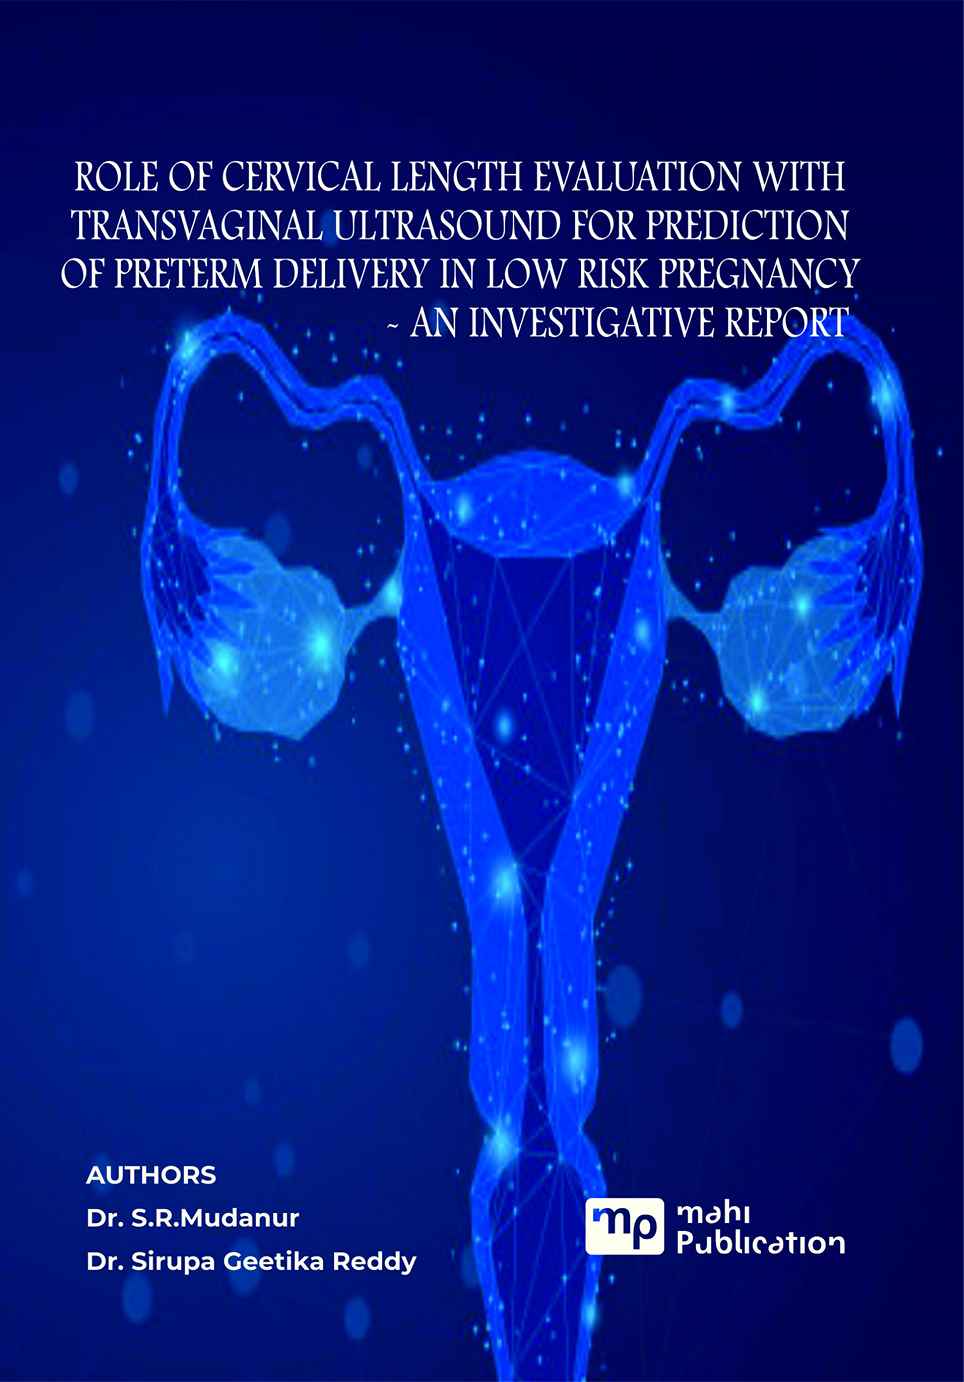 Role Of Cervical Length Evaluation With Transvaginal Ultrasound For Prediction Of Preterm Delivery In Low Risk Pregnancy - An Investigative Report